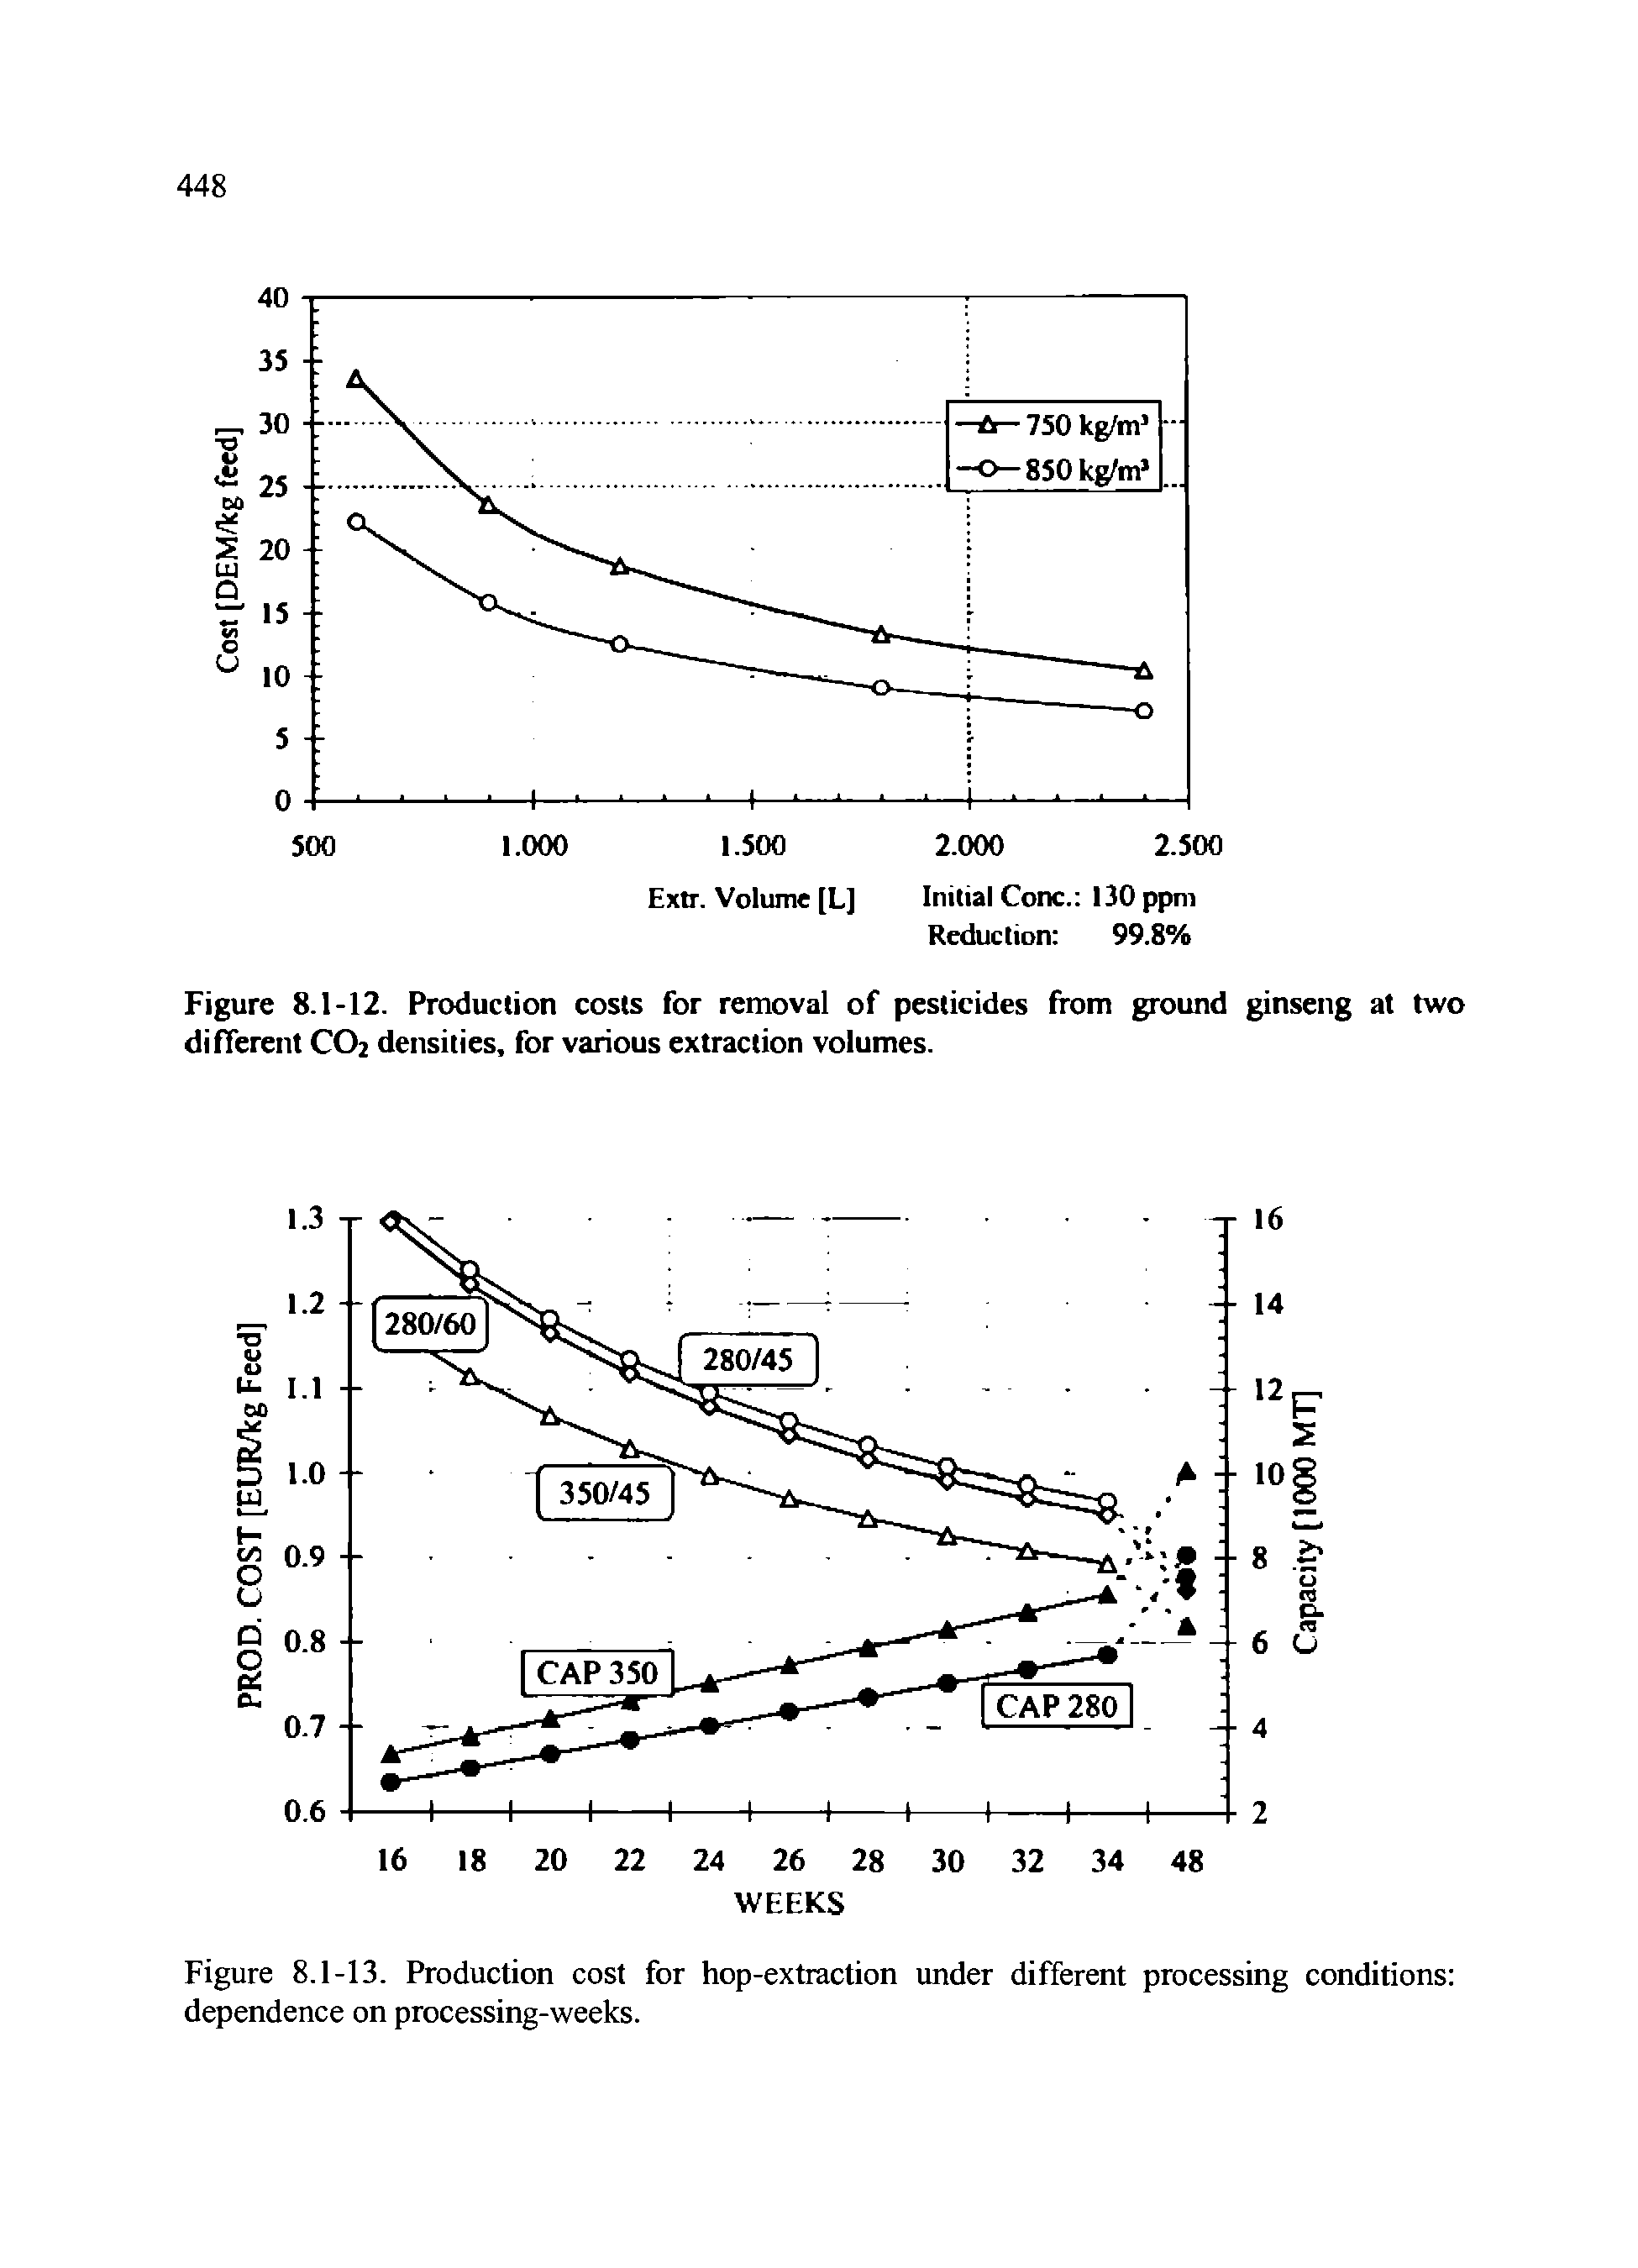 Figure 8.1-13. Production cost for hop-extraction under different processing conditions dependence on processing-weeks.